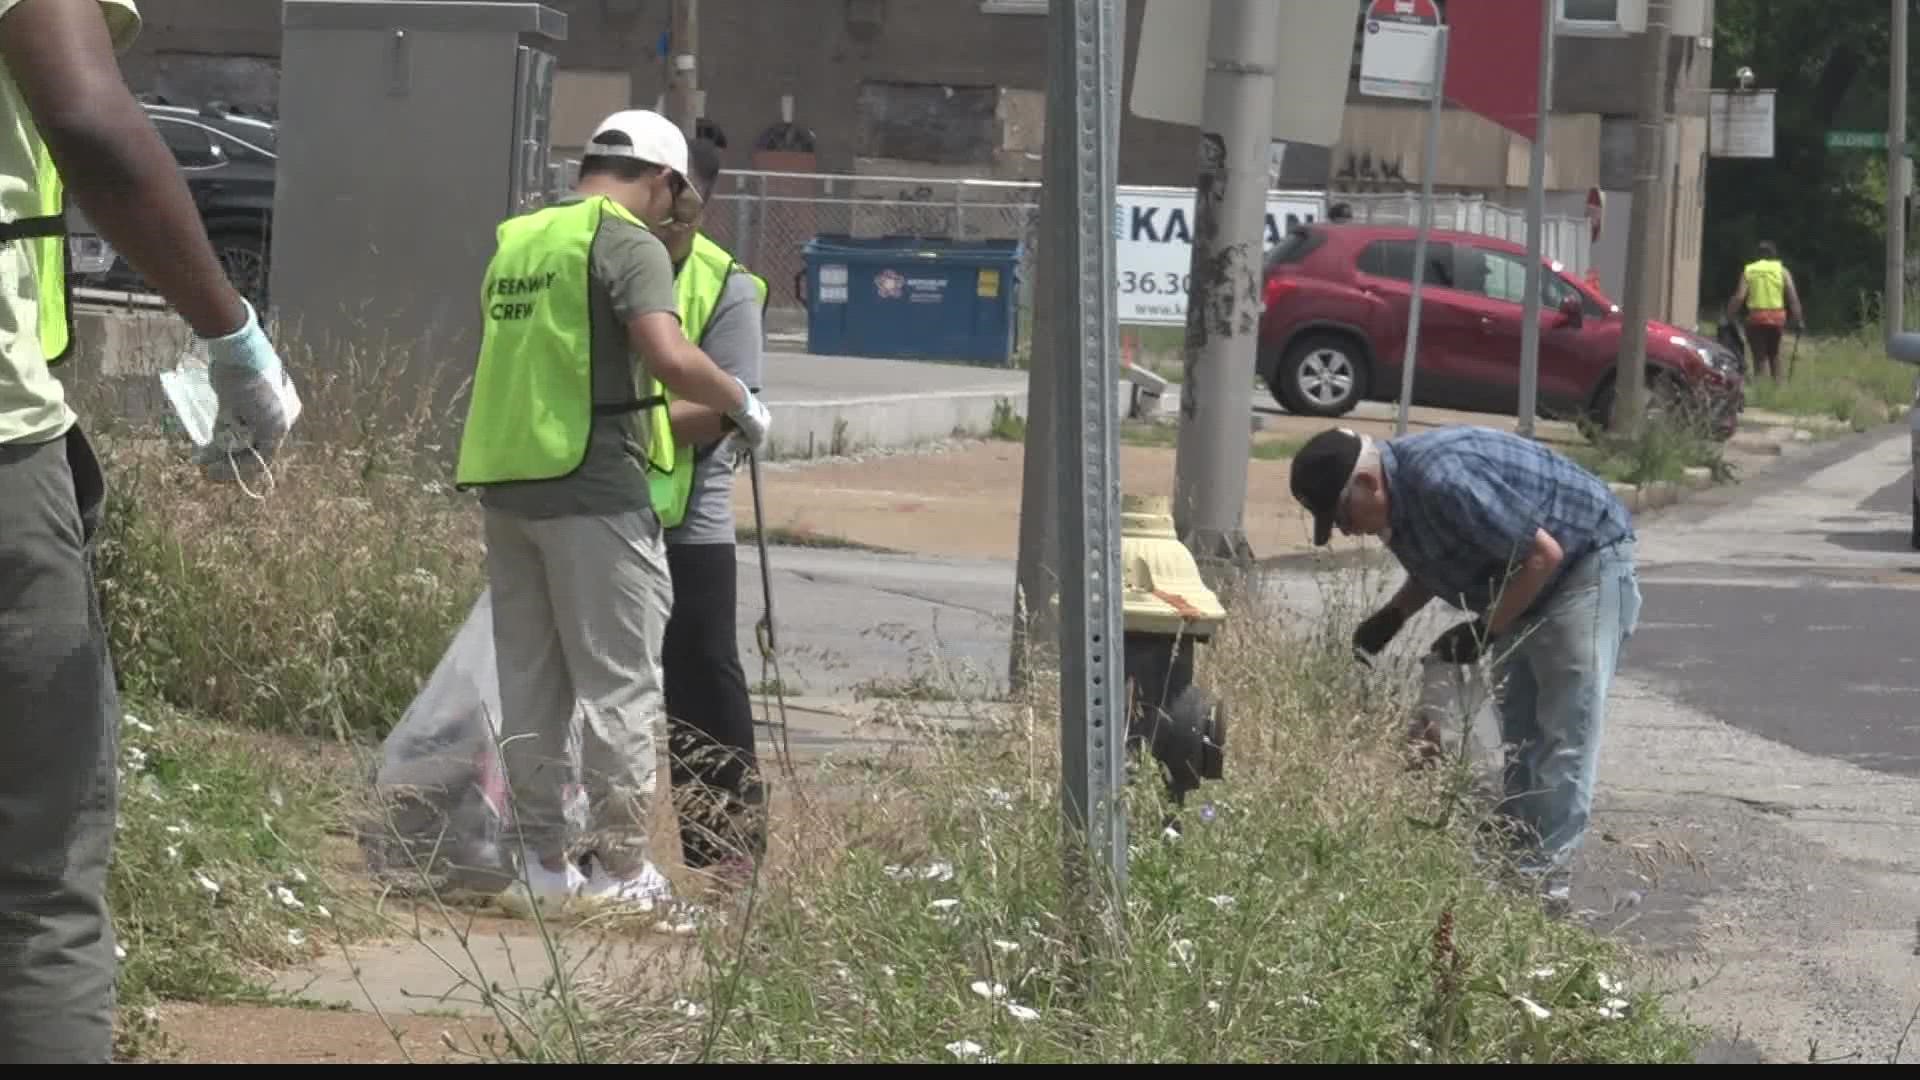 Volunteers picked up trash and boosted morale along the busy street between Natural Bridge and Cook avenues, which will be a future segment of the Brickline Greenway